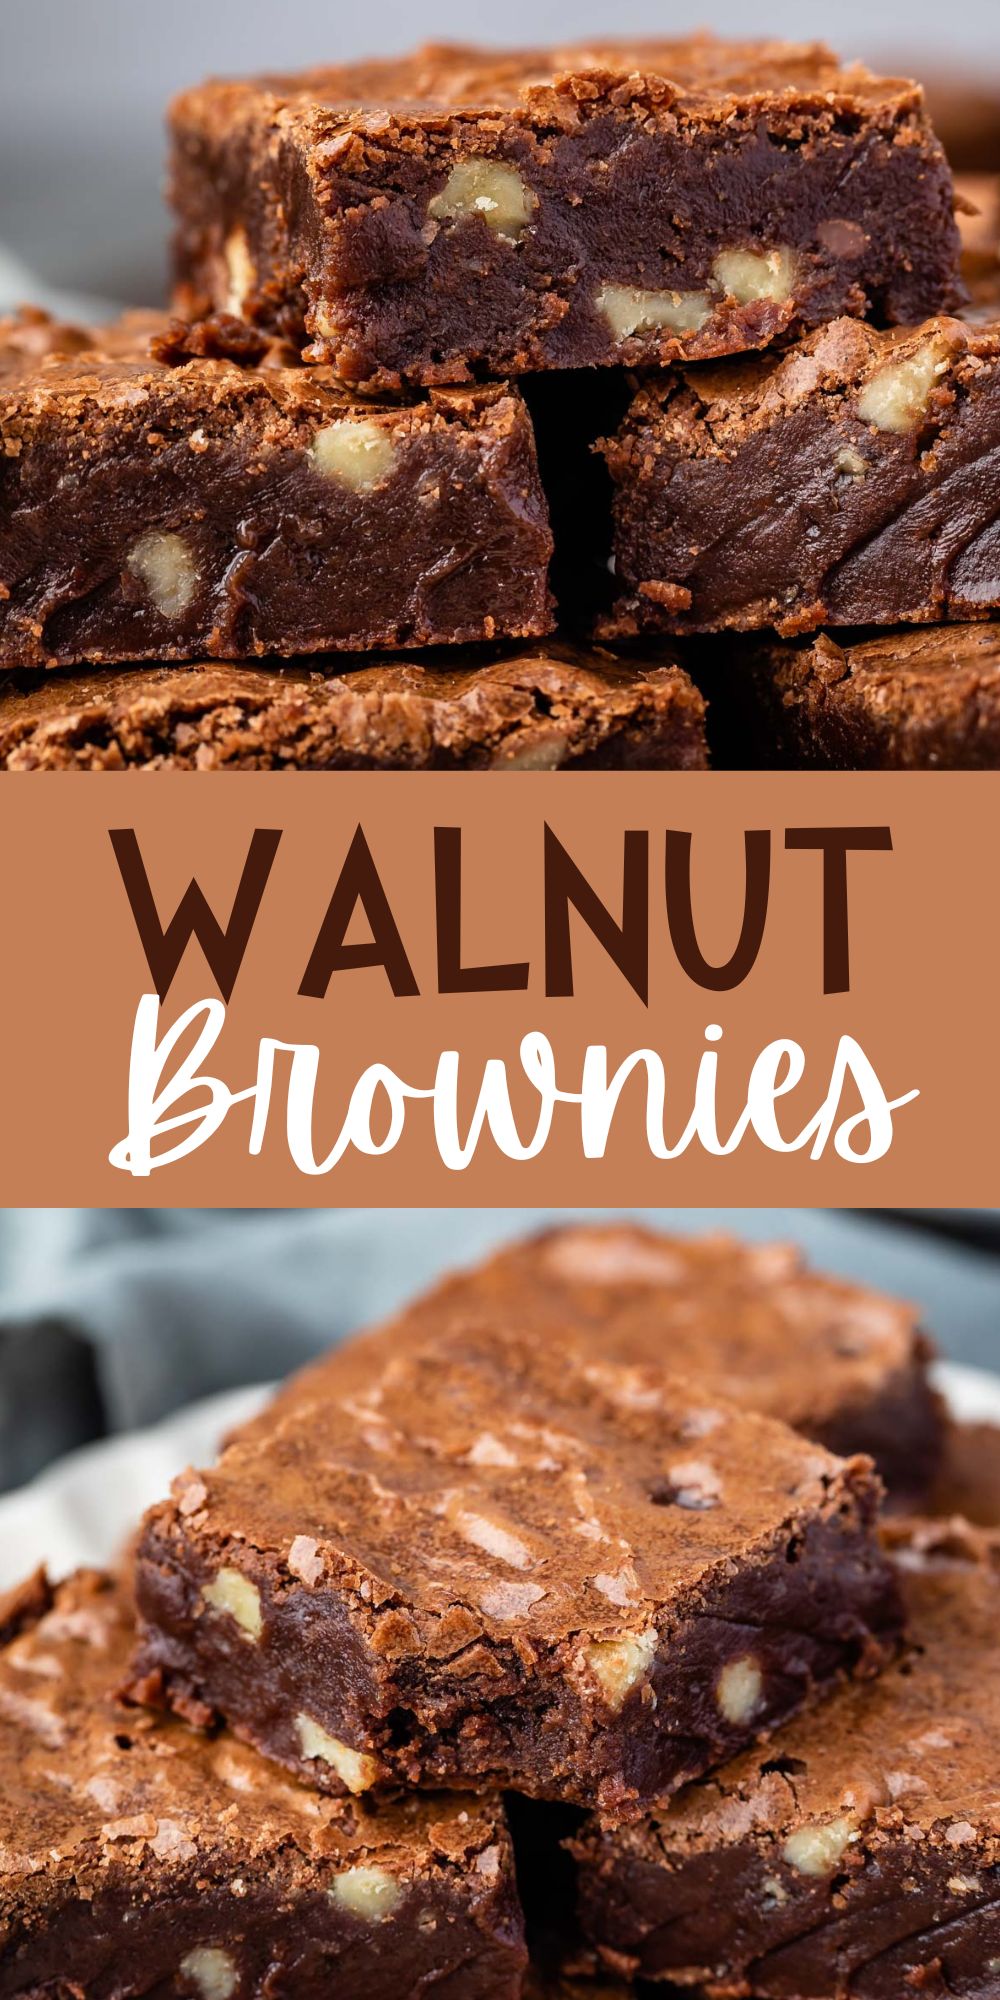 two photos of stacked brownies with walnuts baked in and words on the photo.